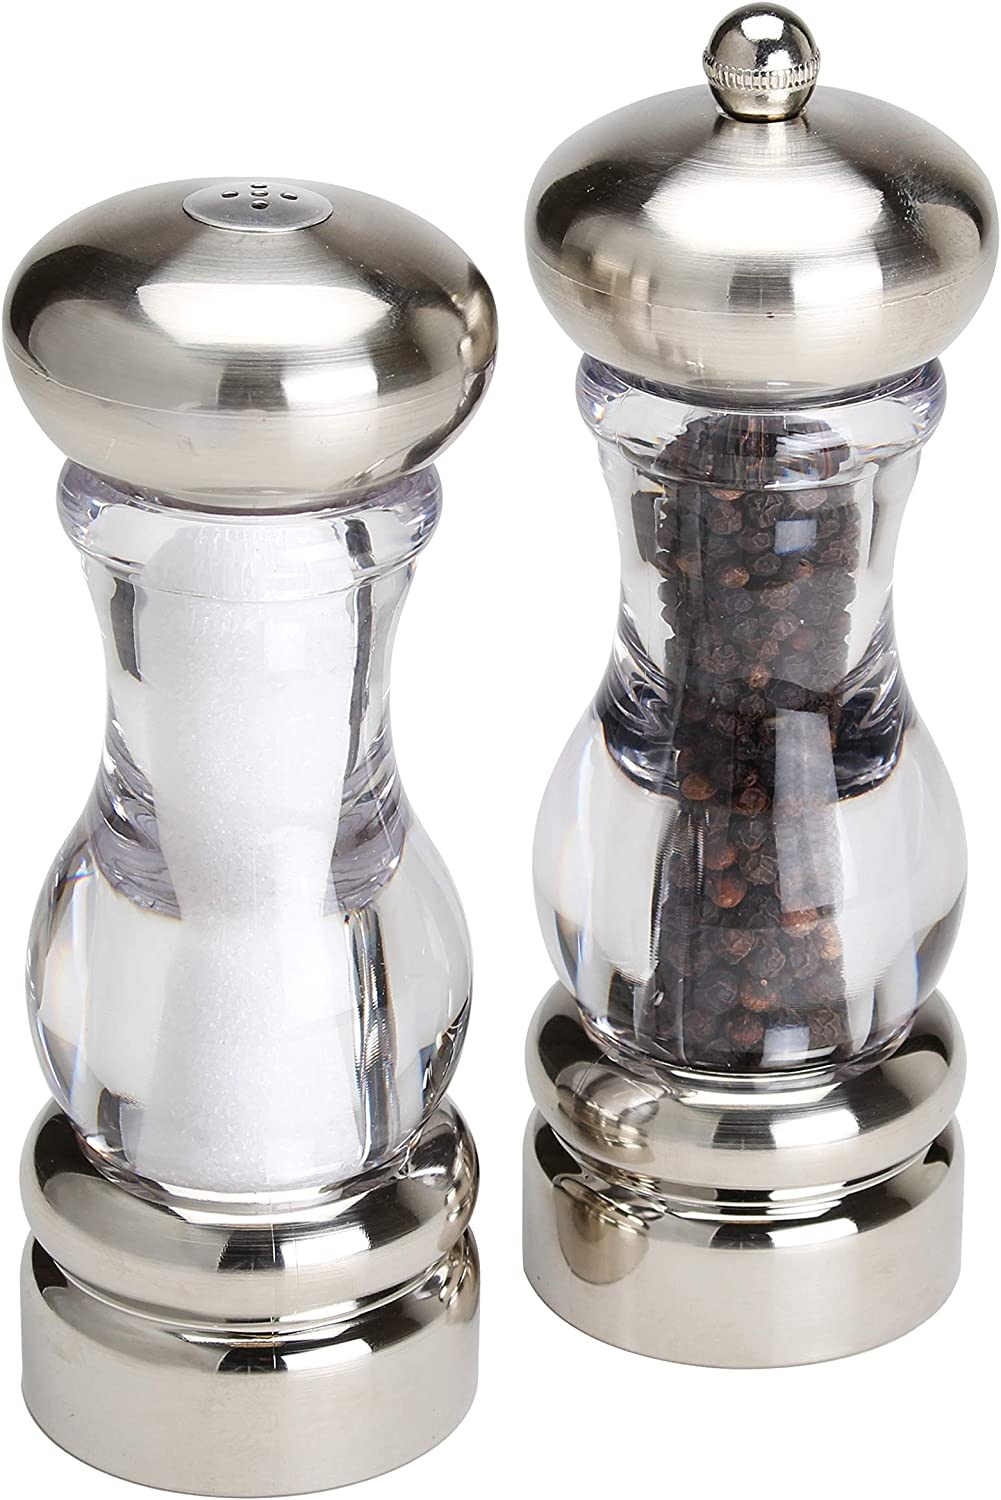 Olde Thompson Del Norte Peppermill and Salt Shaker Set Import To Shop ×Product customization General Description Gallery